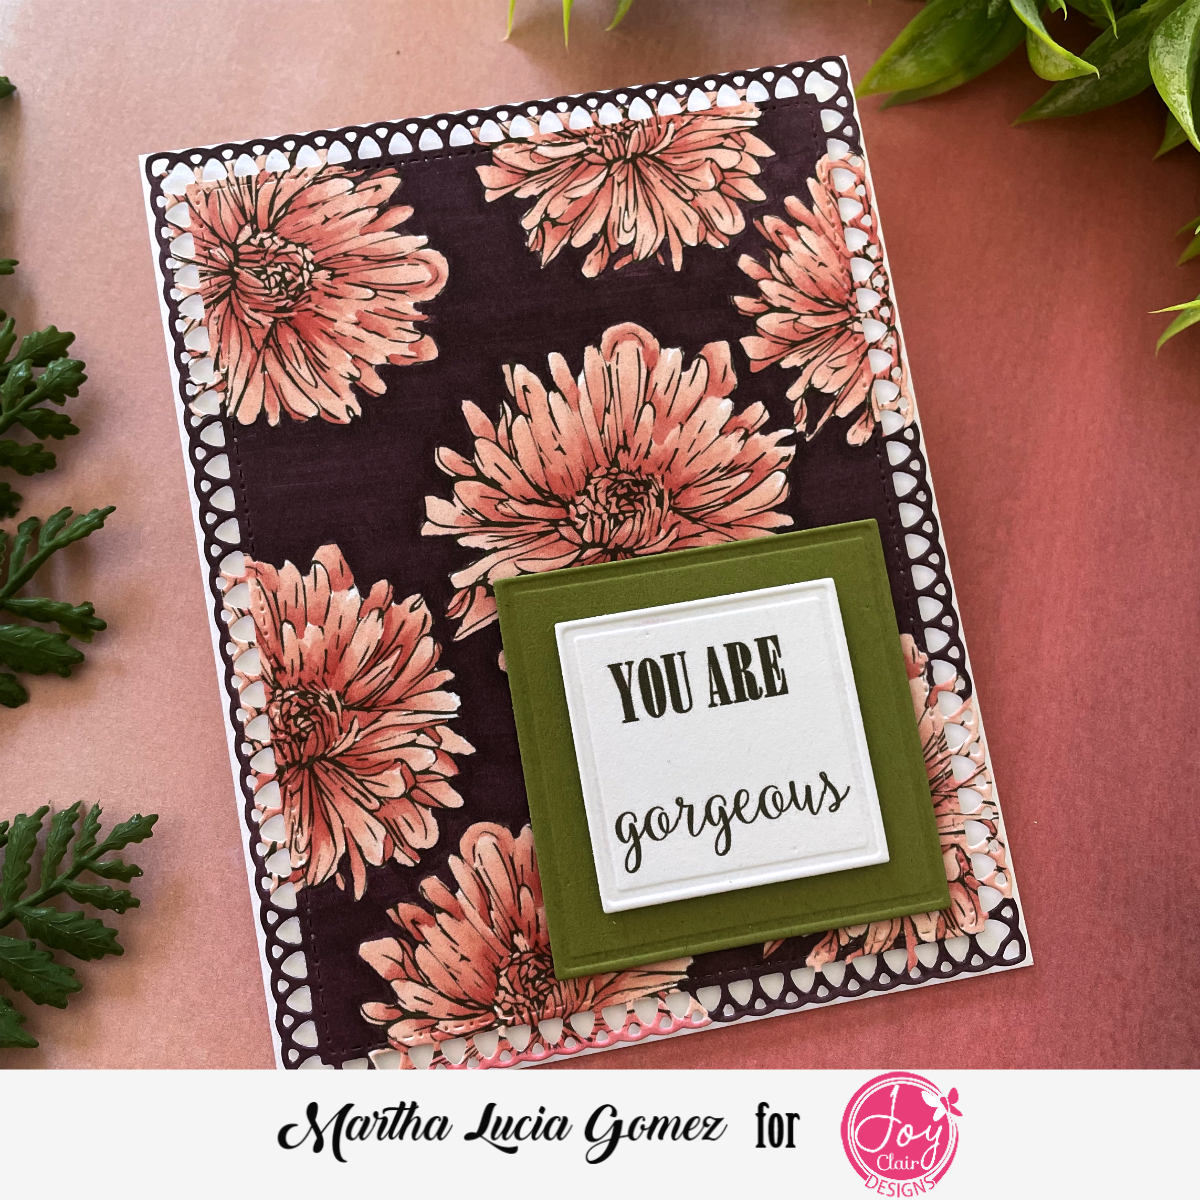 Full colored floral card